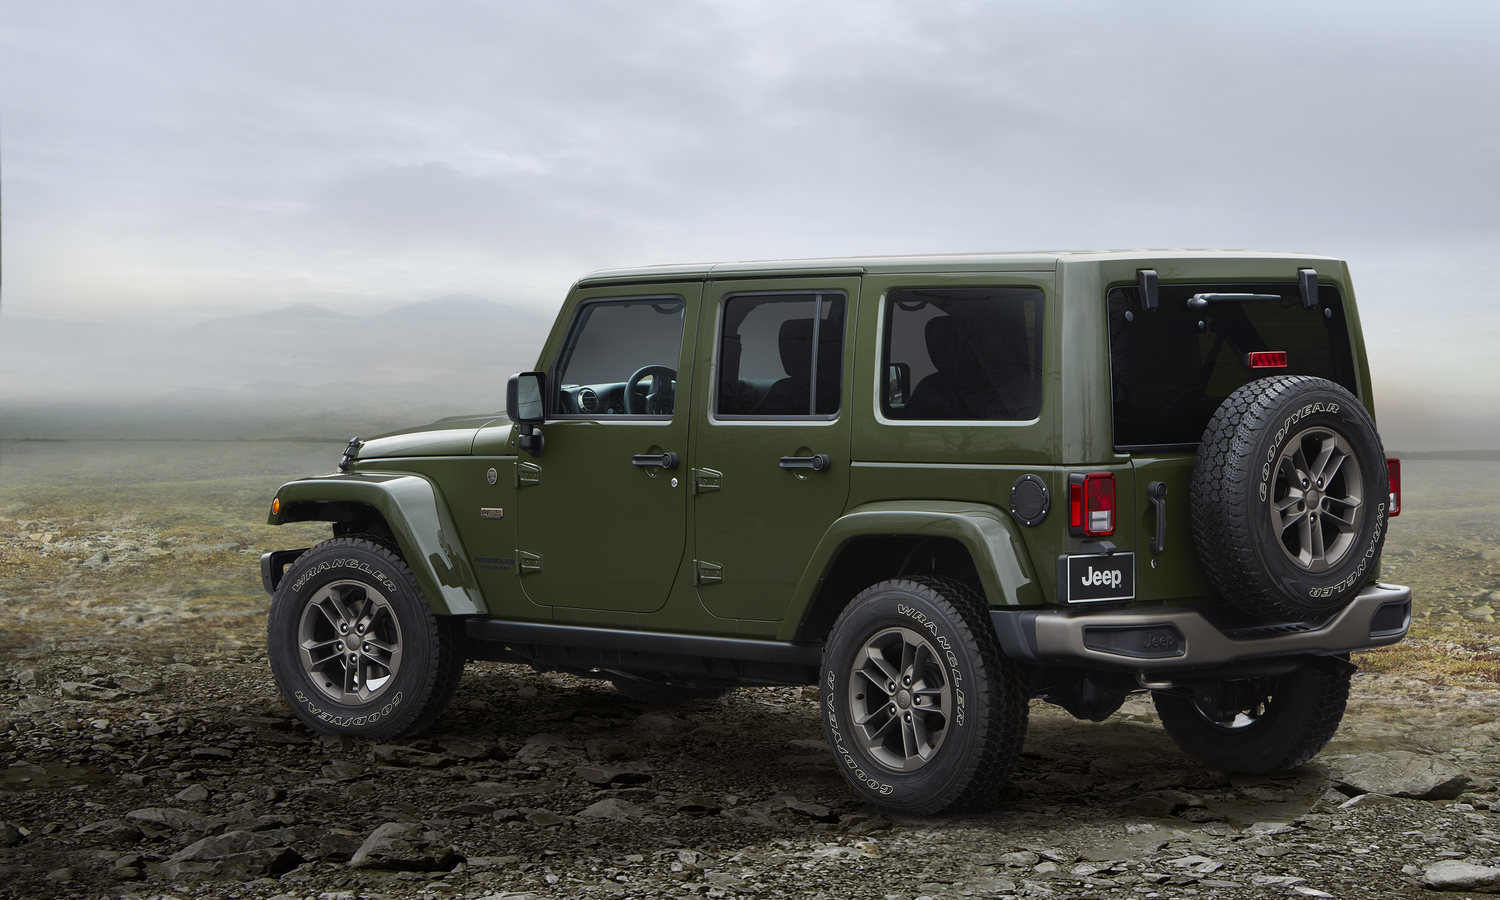 2016 Jeep Wrangler Unlimited 75th Anniversary edition